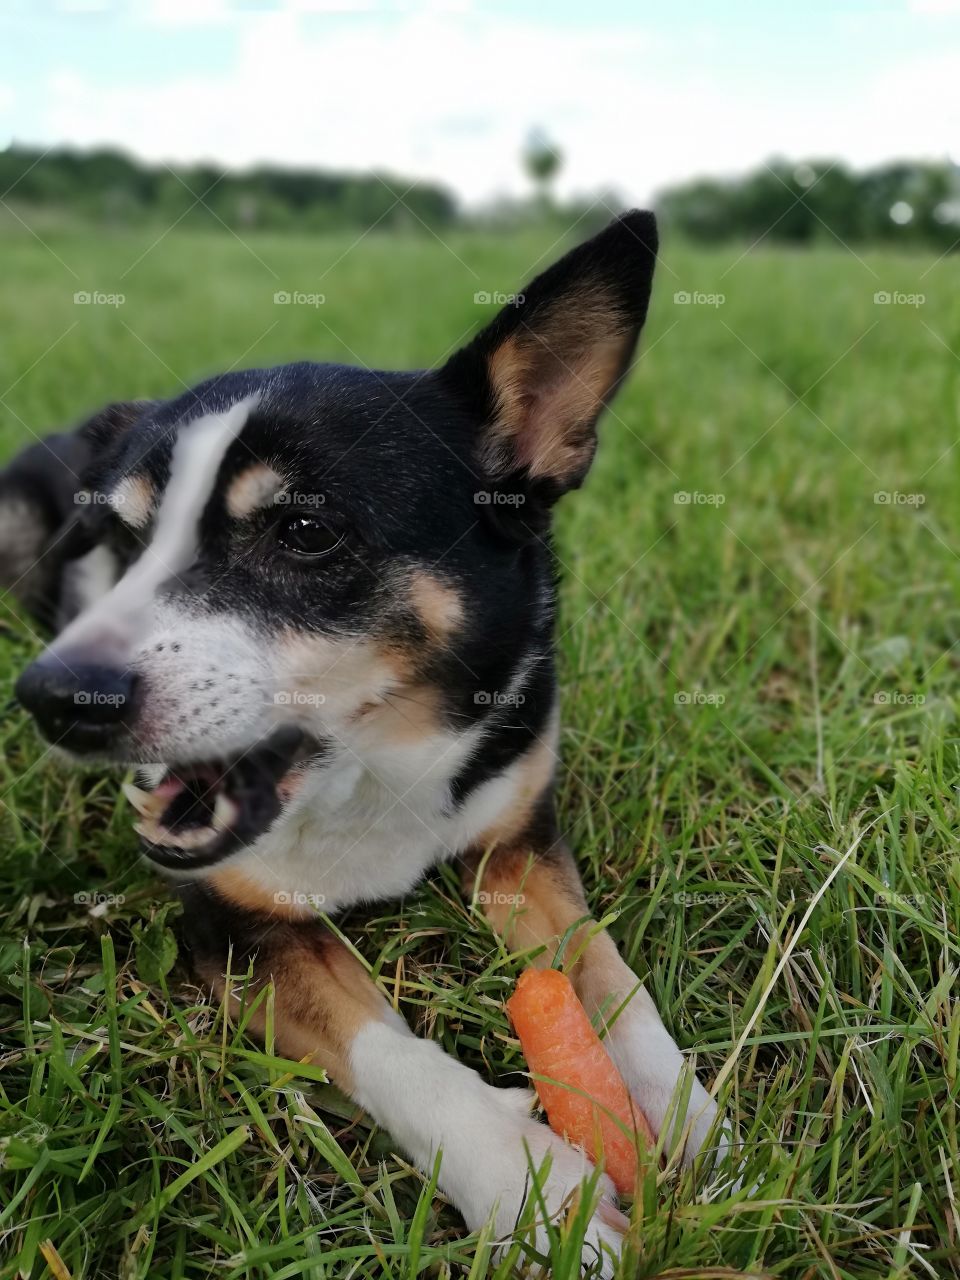 Cute little black and white dog eating a carrot in a field